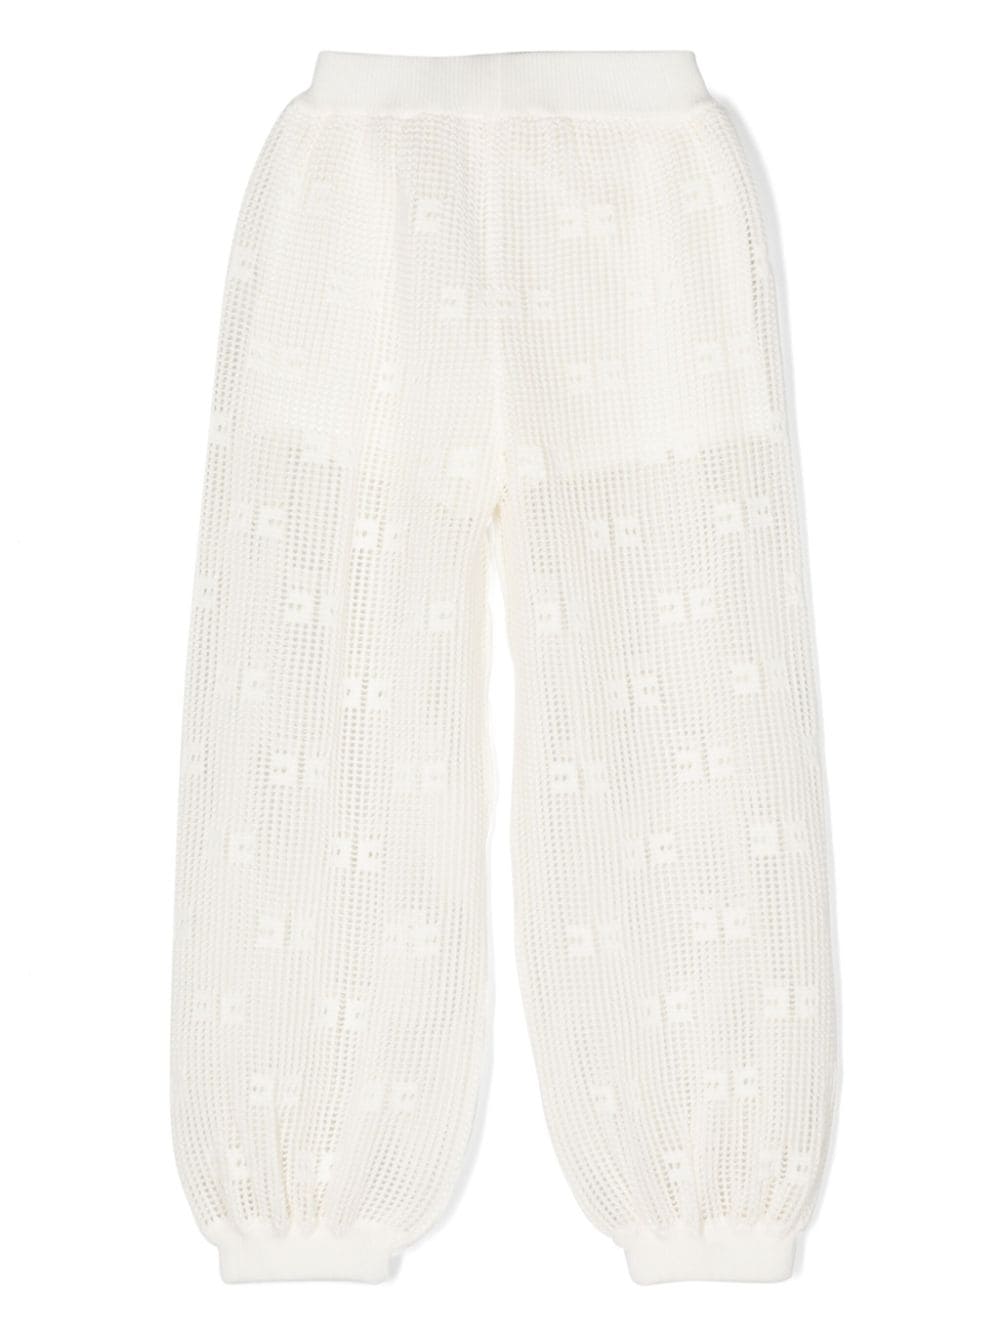 Ivory white trousers for girls